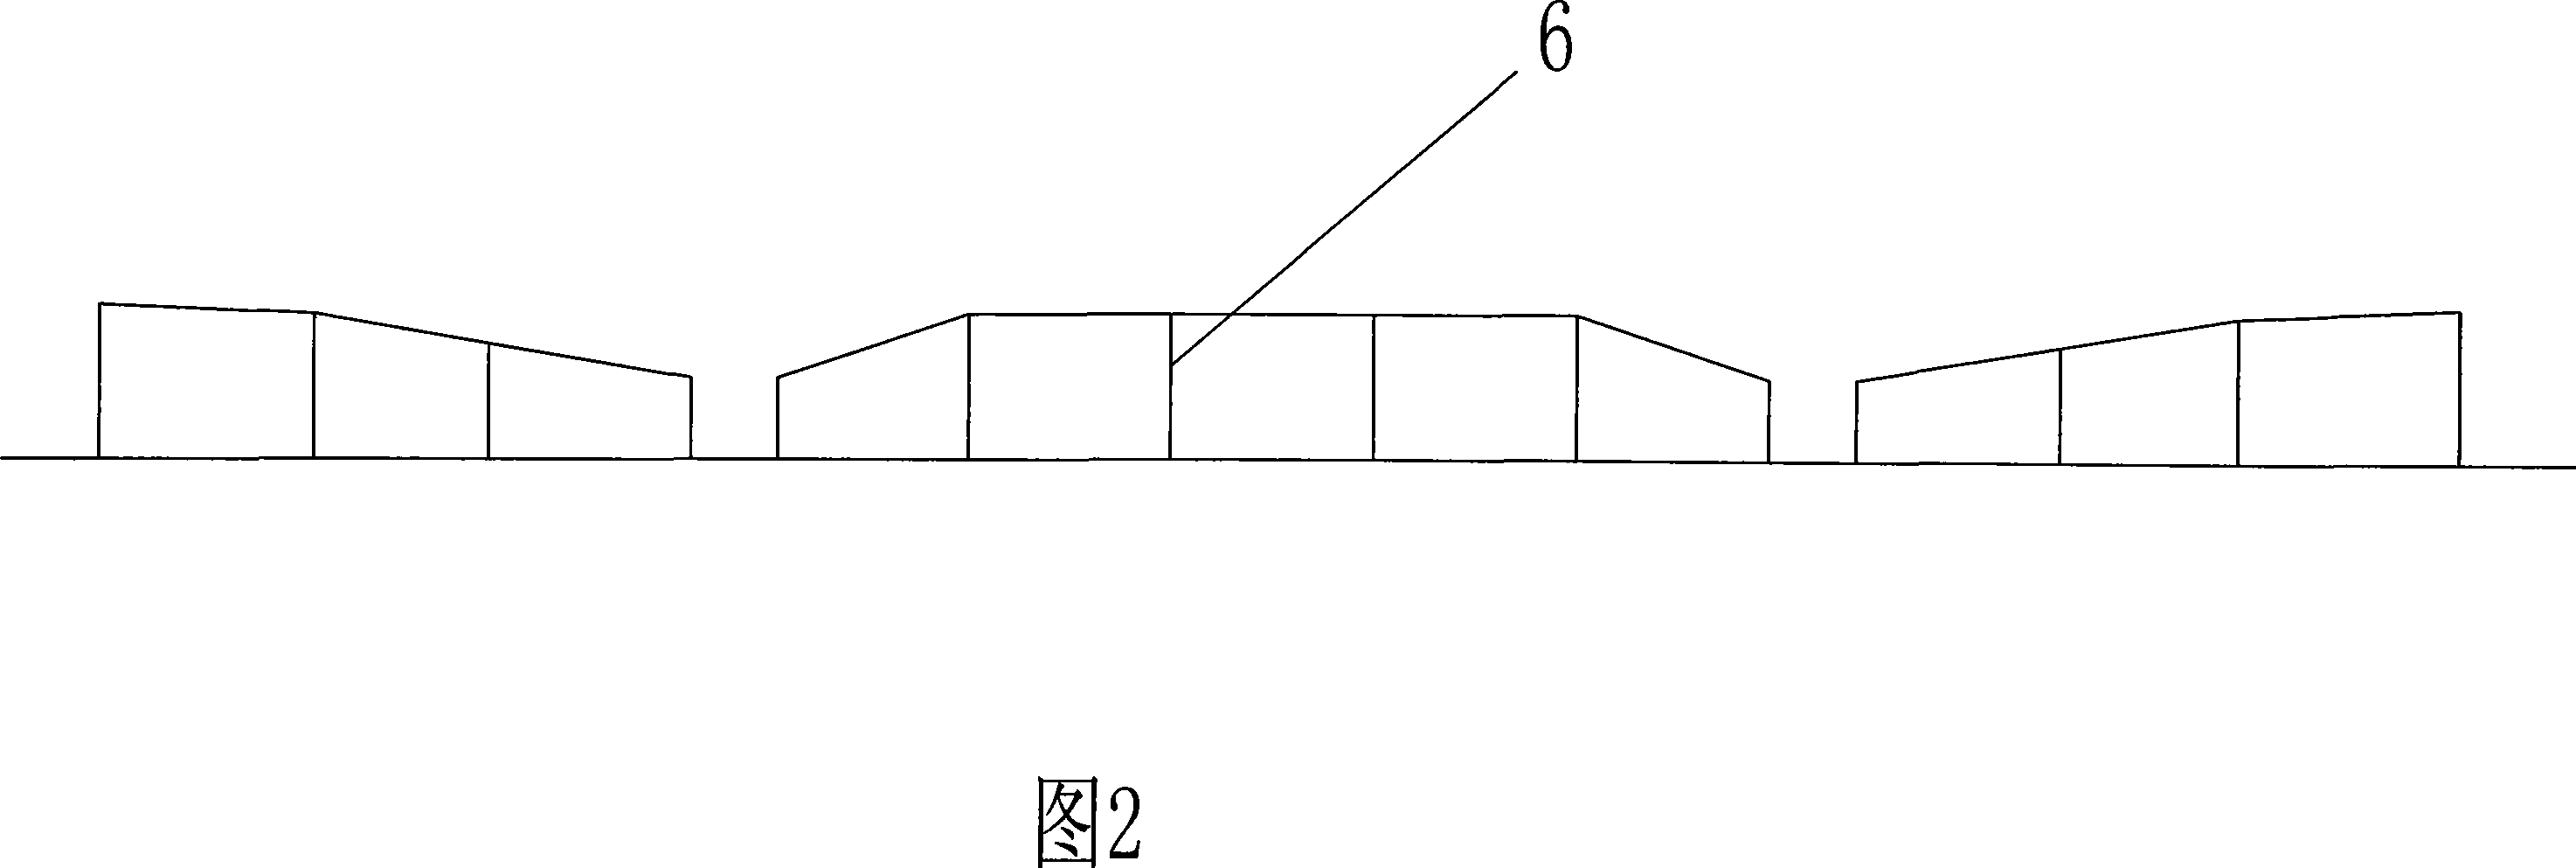 Box-beam steel bar centralized tying and integral hoisting construction method